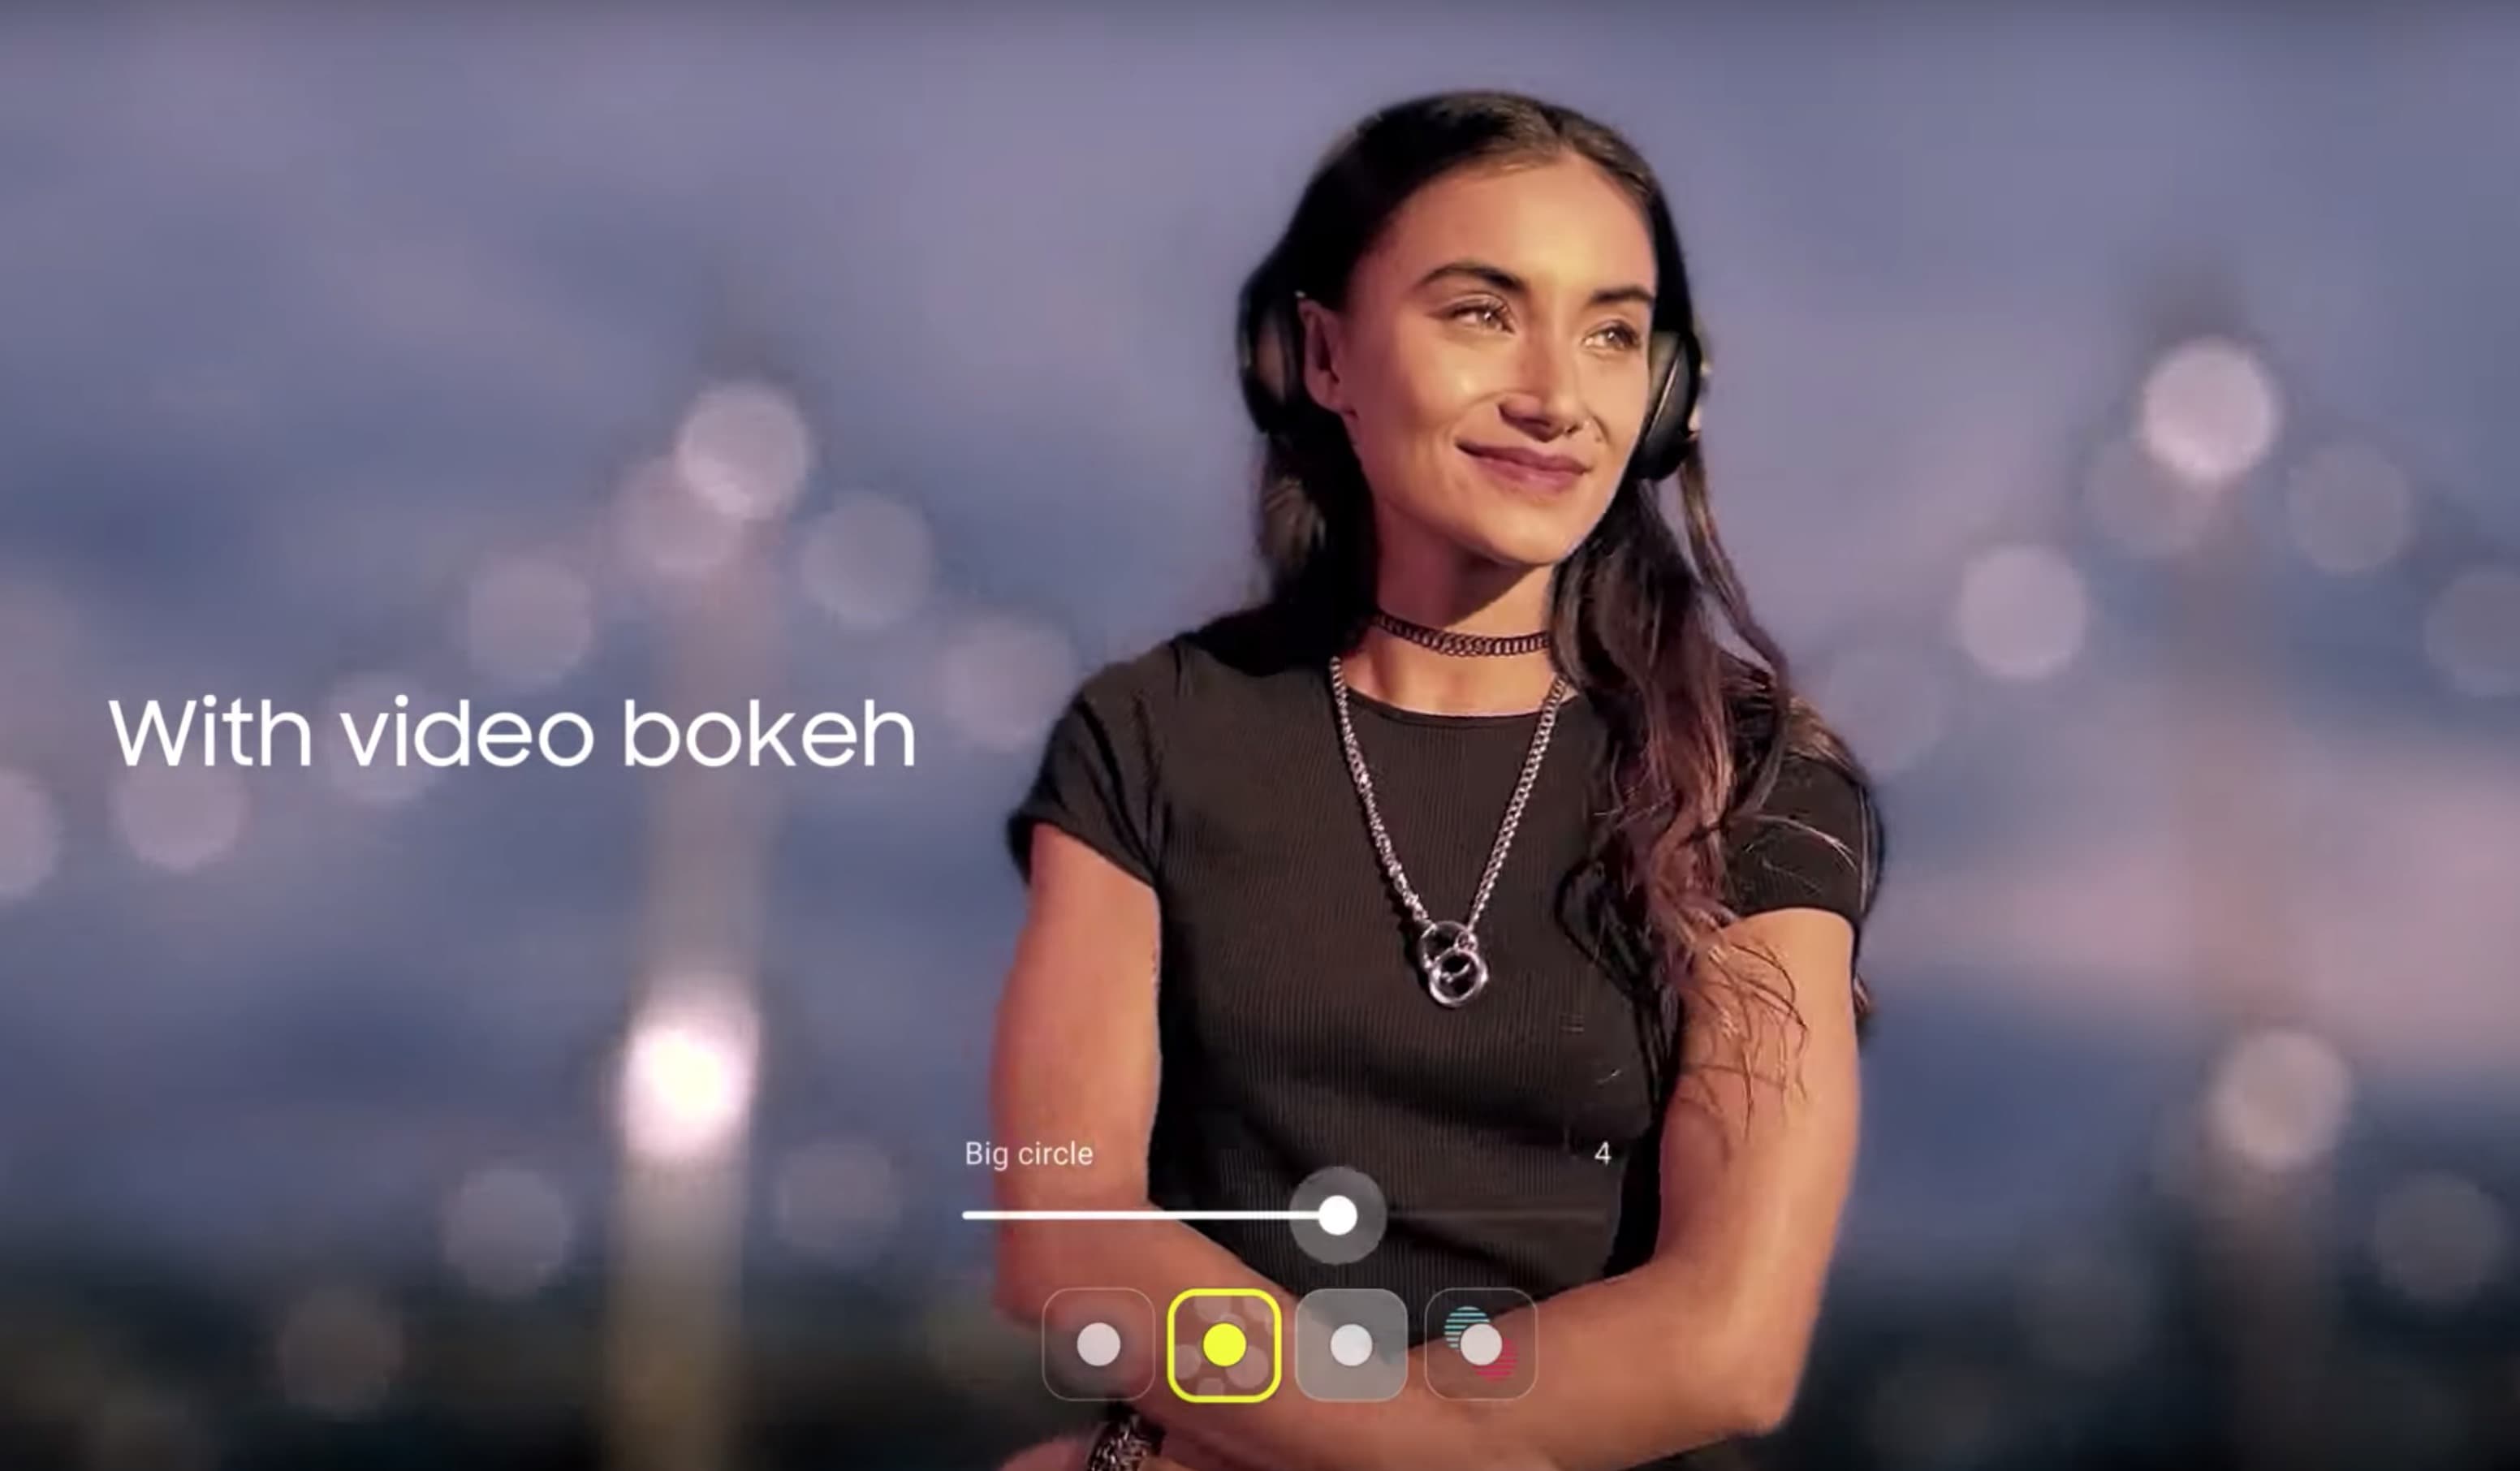 Portrait Mode comes to moving images with Samsung's video bokeh.